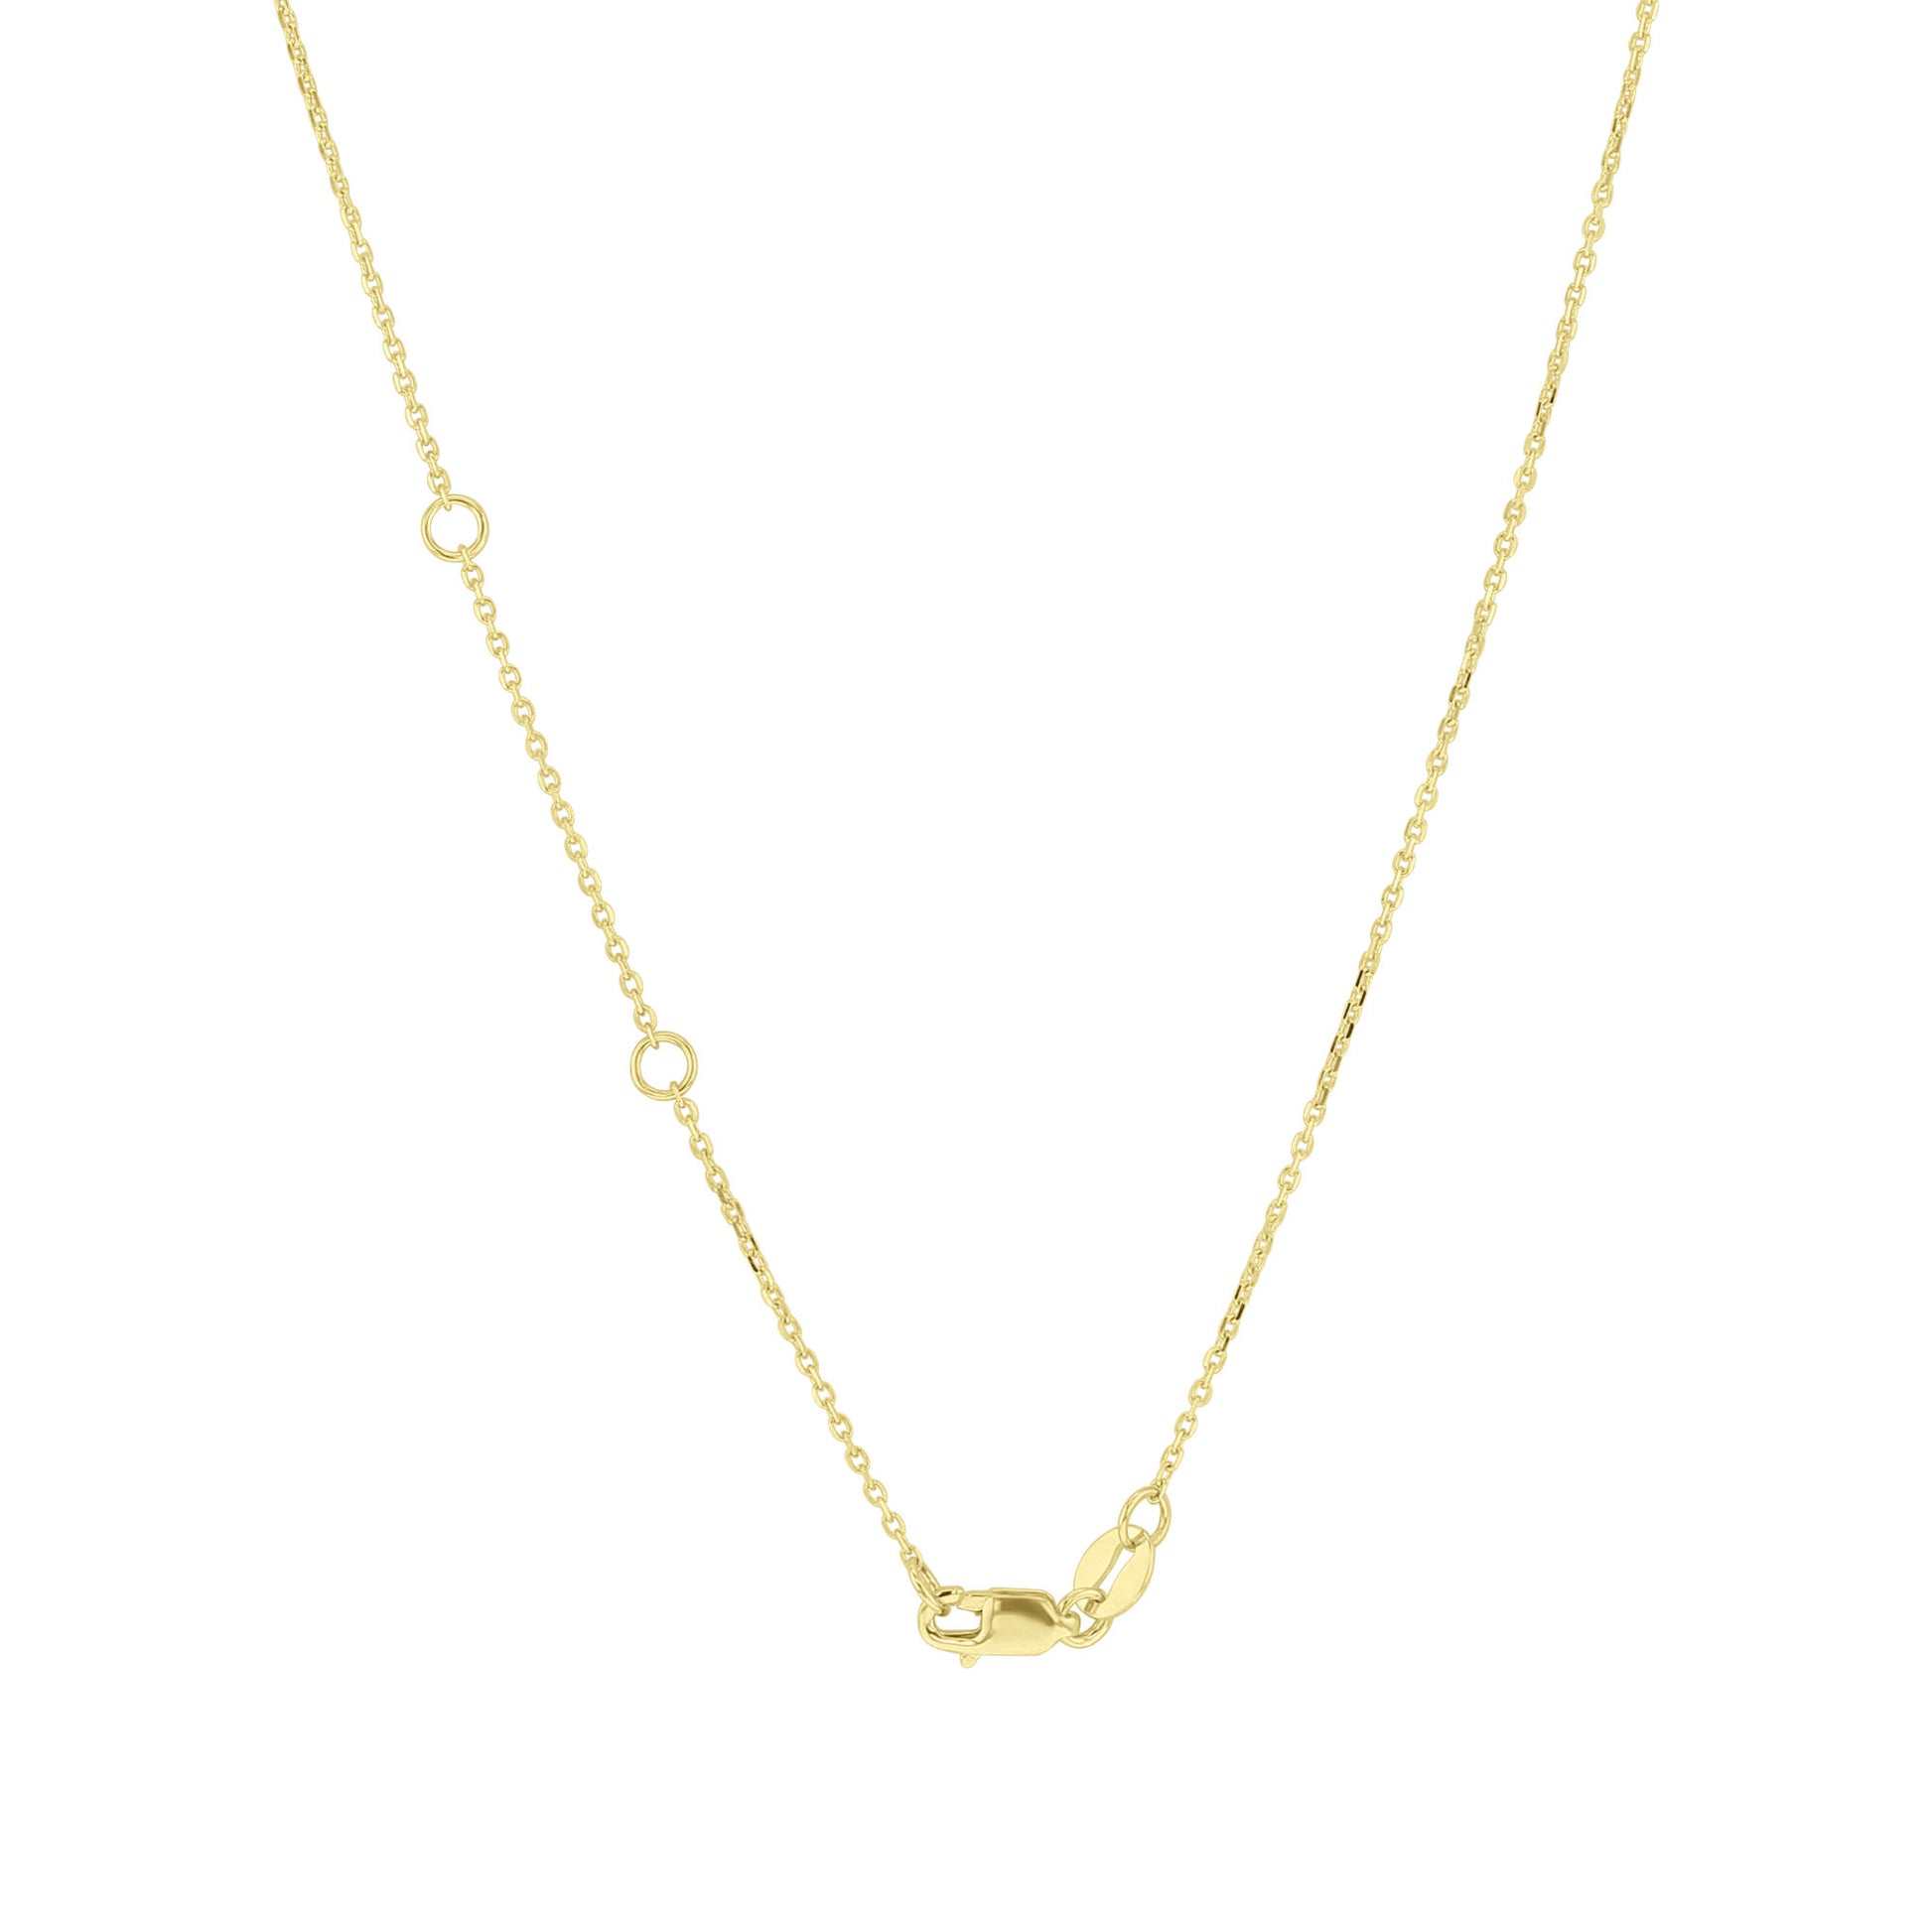 Classic Gold Cross Necklace